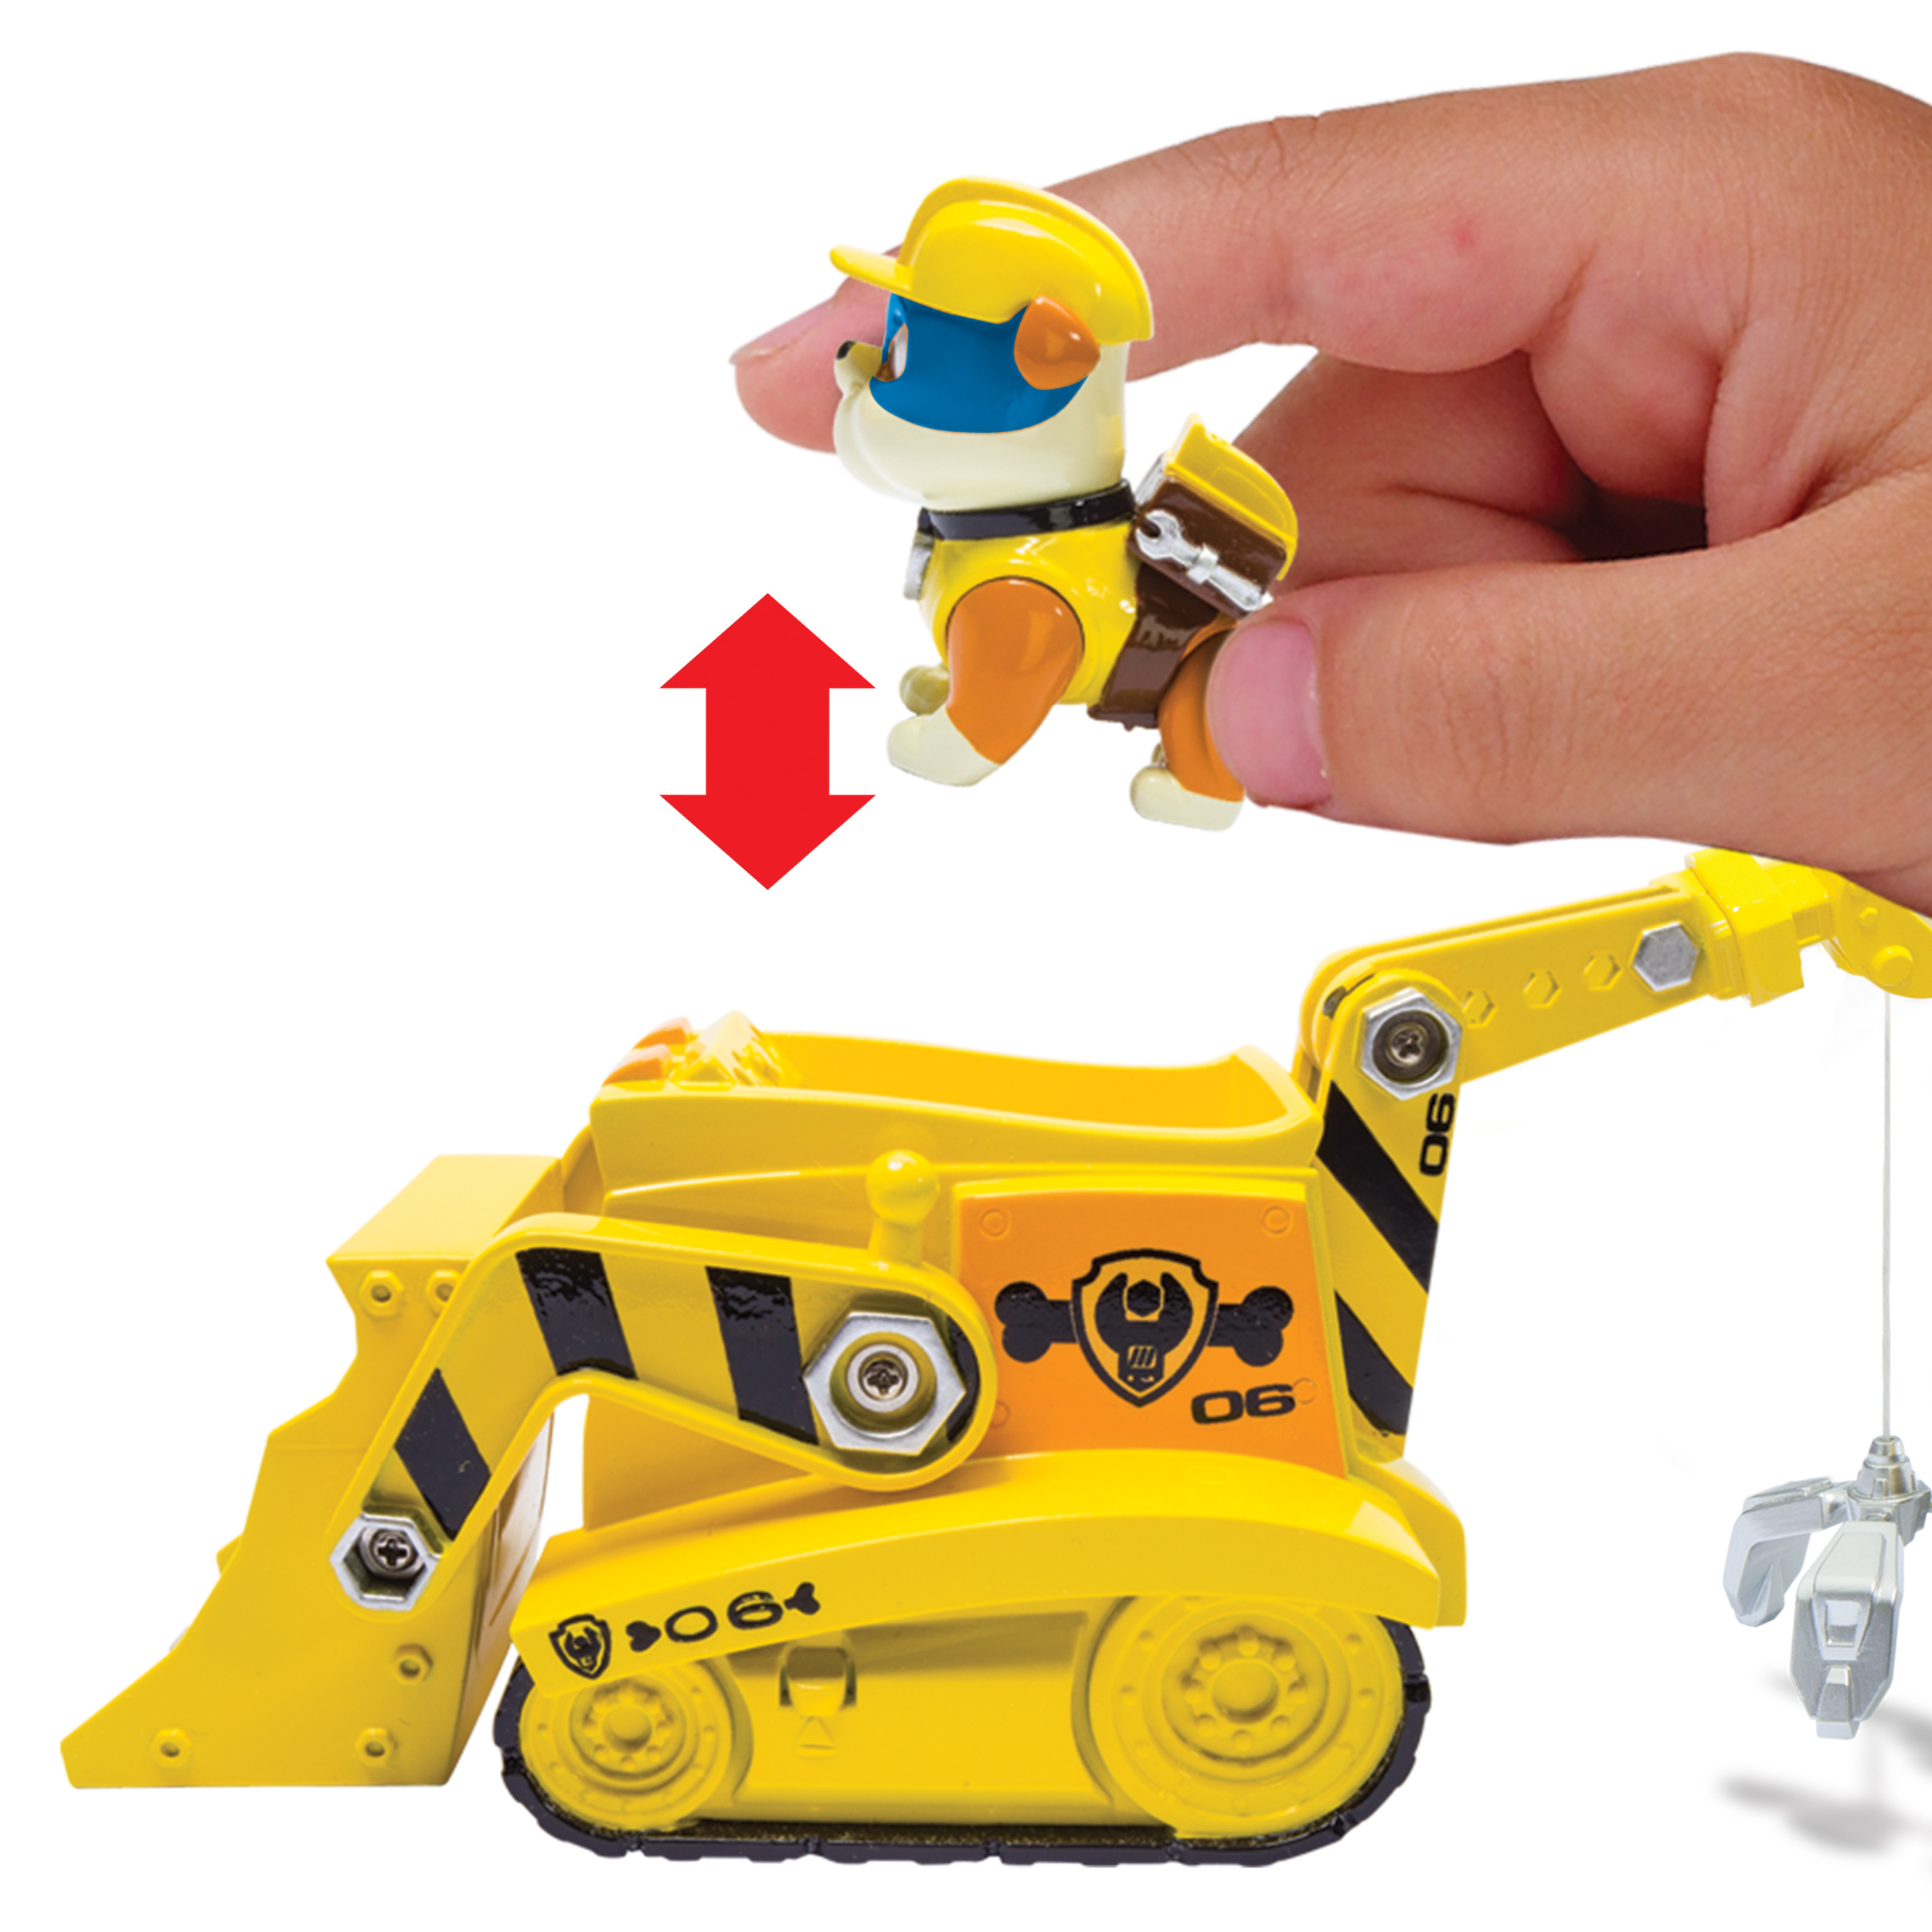 Paw Patrol Super Pup Rubble's Crane, Vehicle and Figure - image 4 of 6